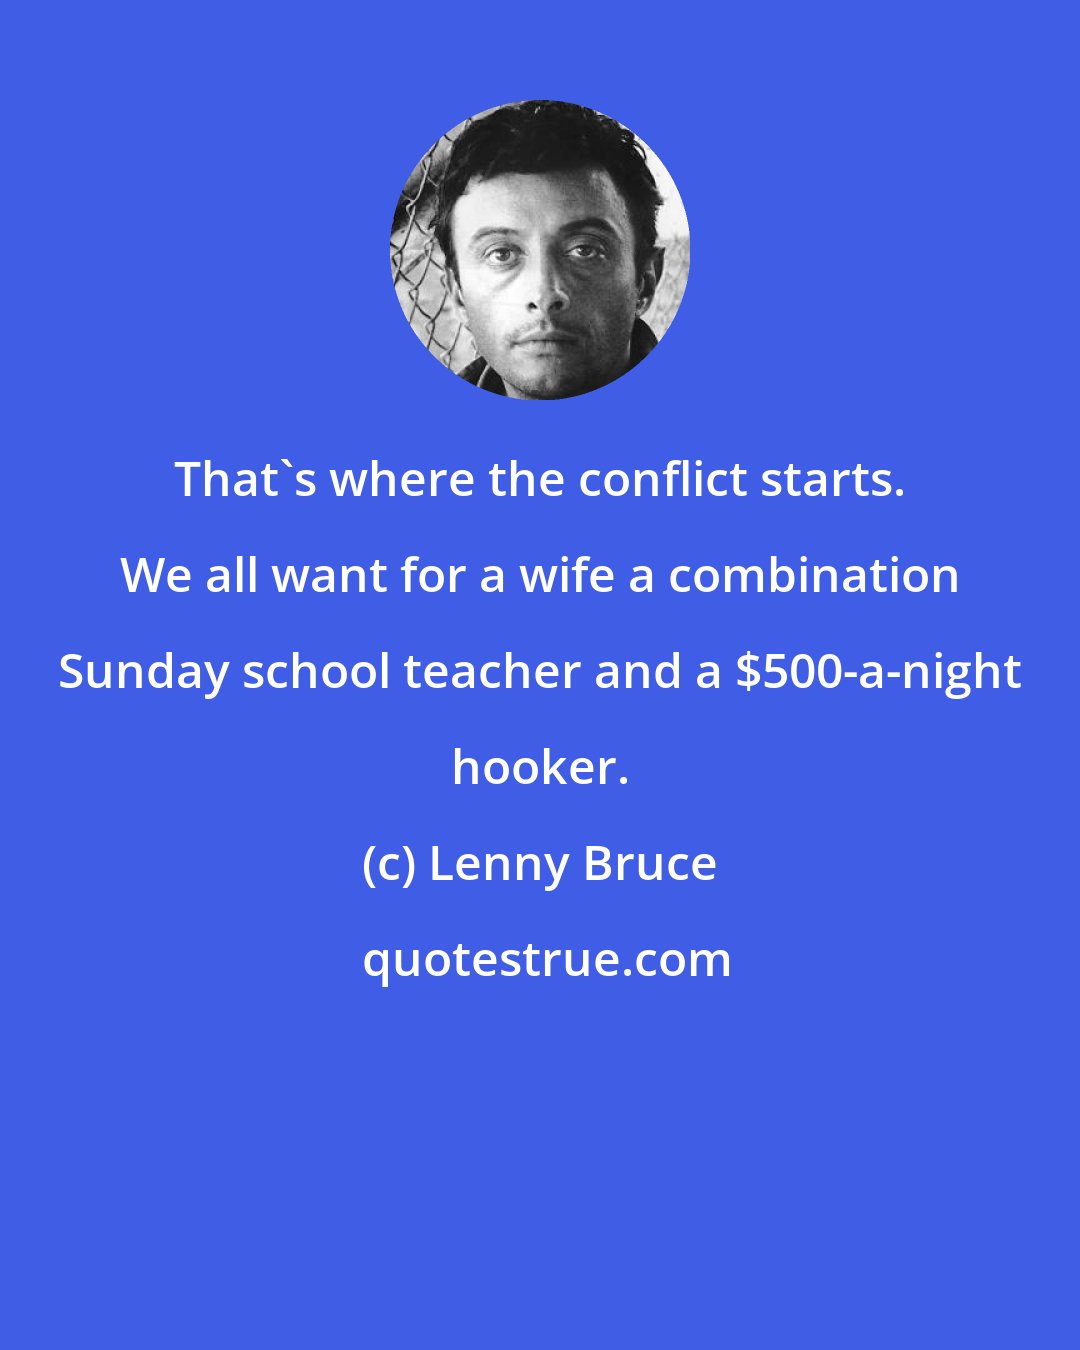 Lenny Bruce: That's where the conflict starts. We all want for a wife a combination Sunday school teacher and a $500-a-night hooker.